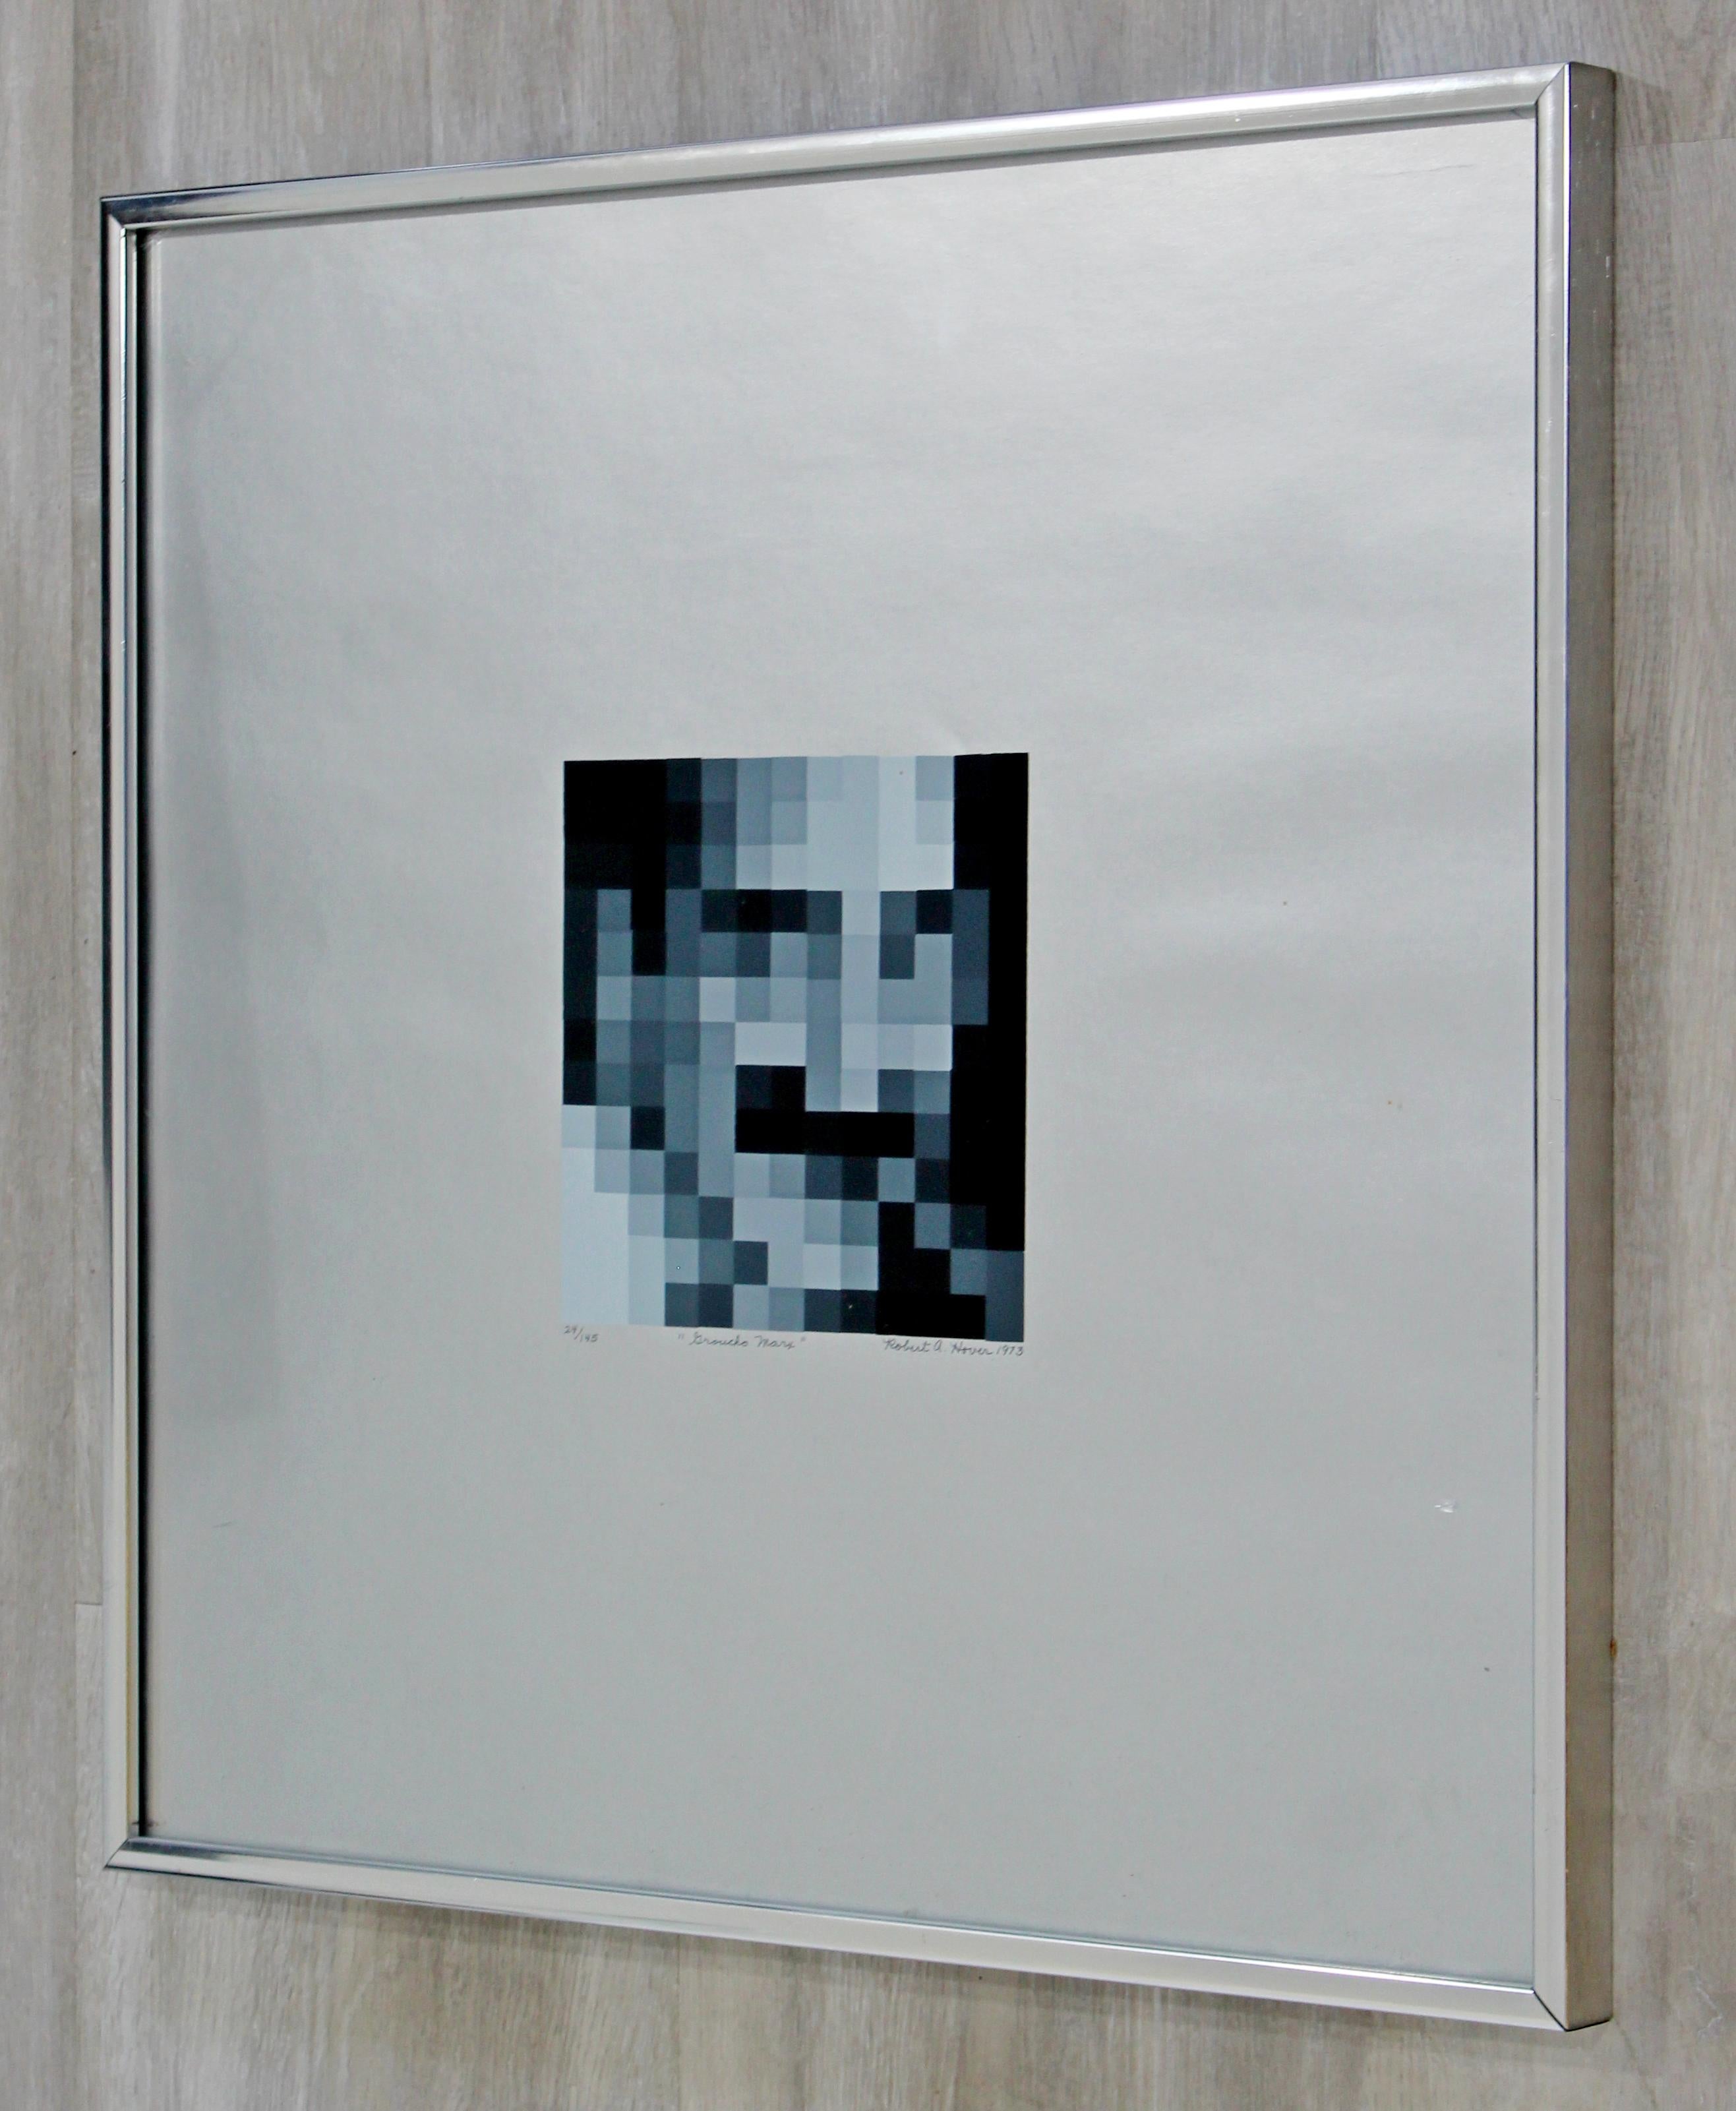 Late 20th Century Modern Framed Robert Hover Groucho Marx Pixel Art Seriolithograph Signed, 1973 For Sale